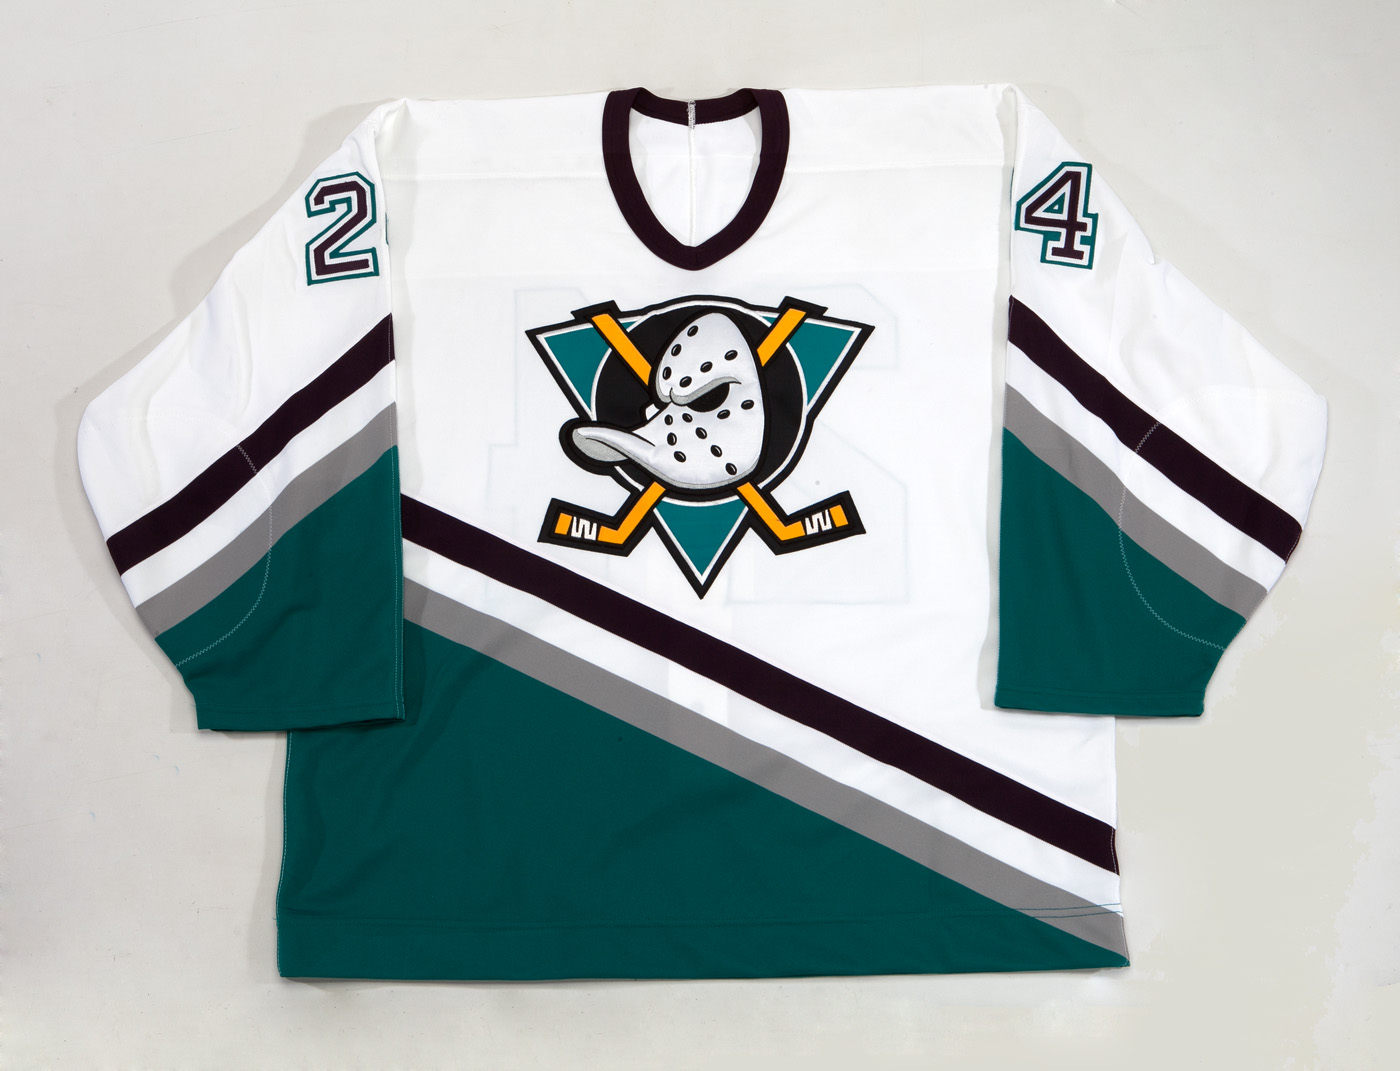 Shohei Ohtani and Mike Trout tried on retro Mighty Ducks jerseys